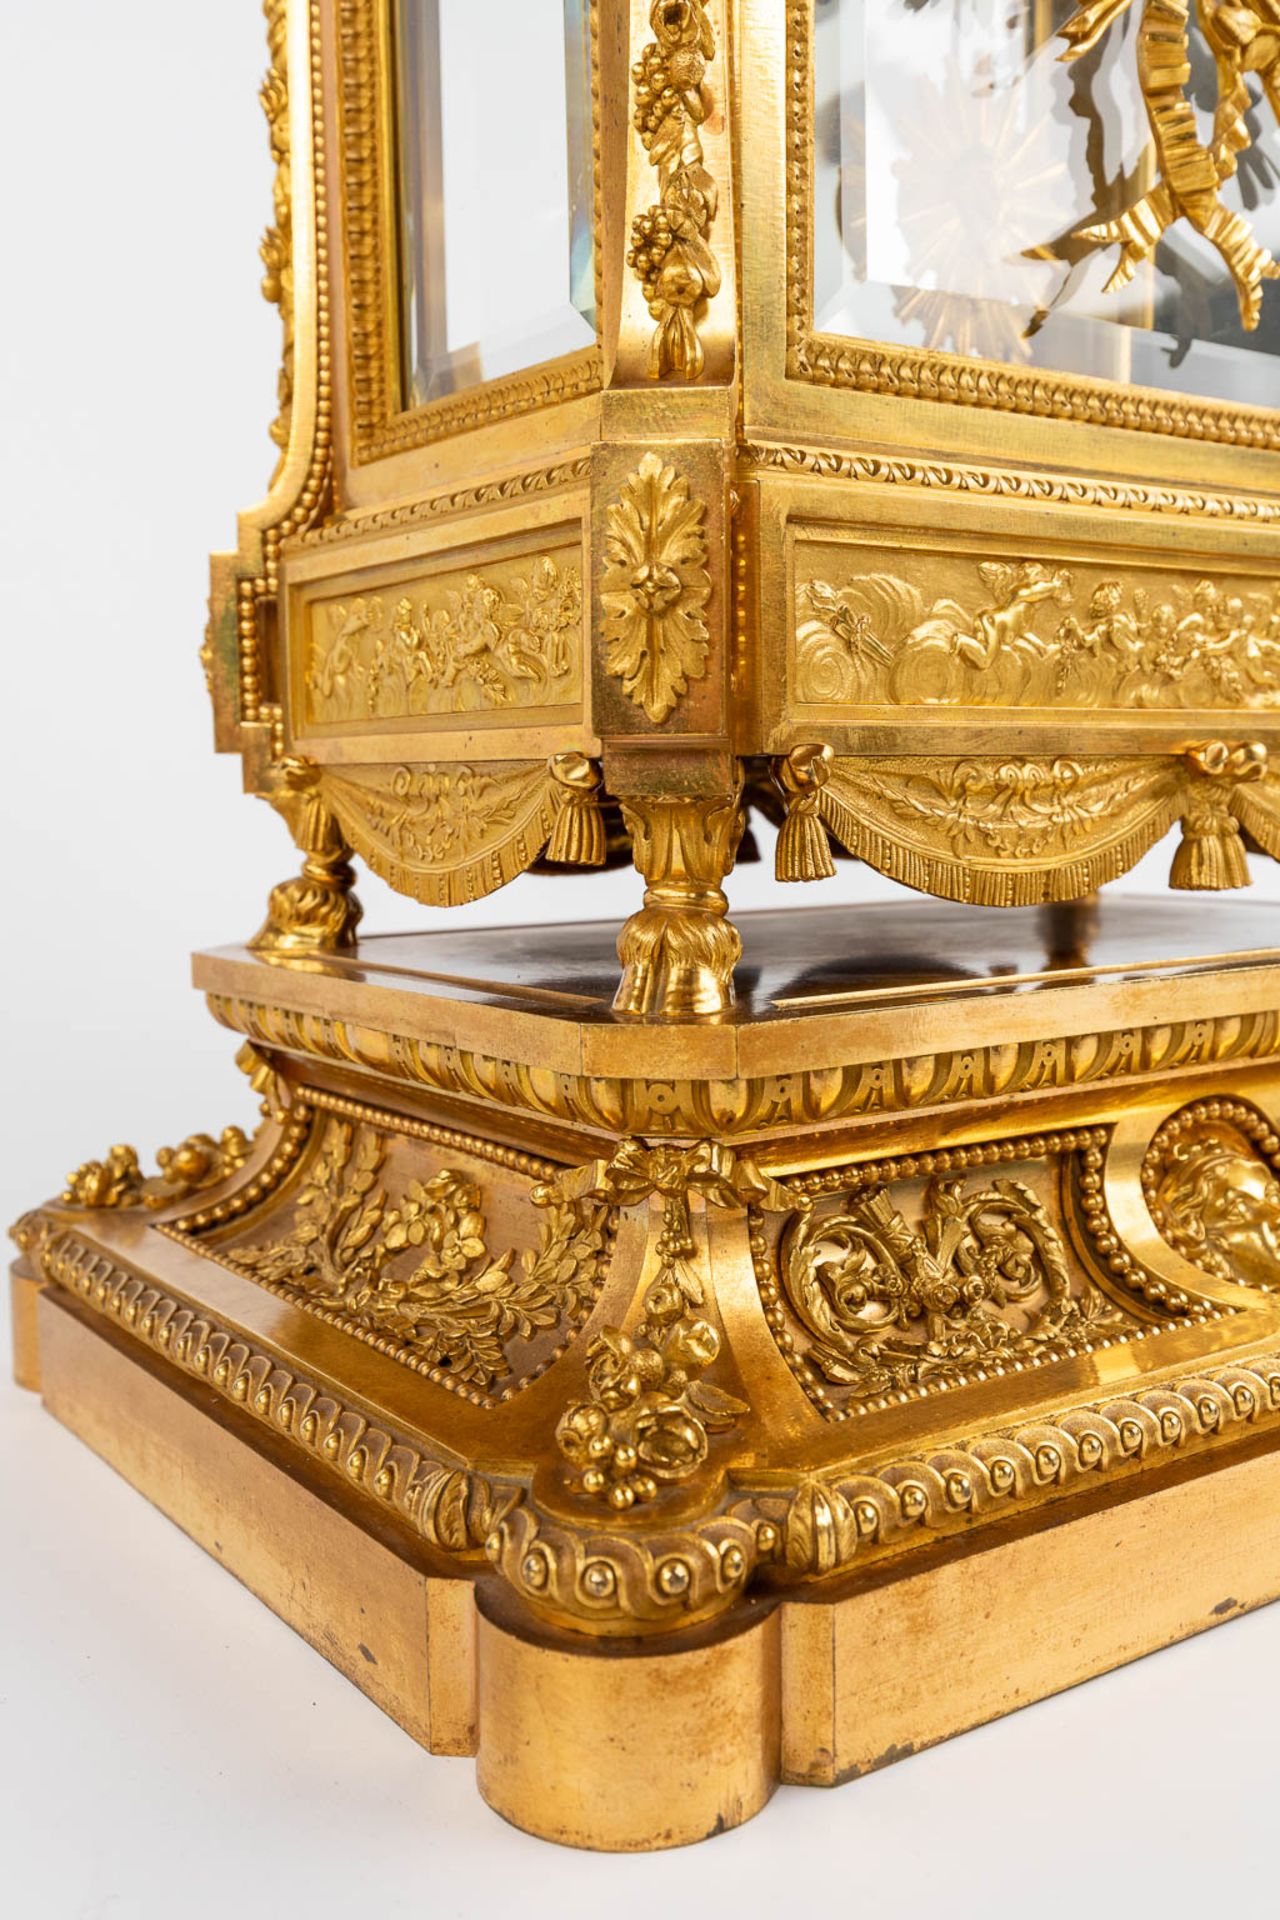 An imposing three-piece mantle garniture clock and candelabra, gilt bronze in Louis XVI style. Maiso - Image 9 of 38